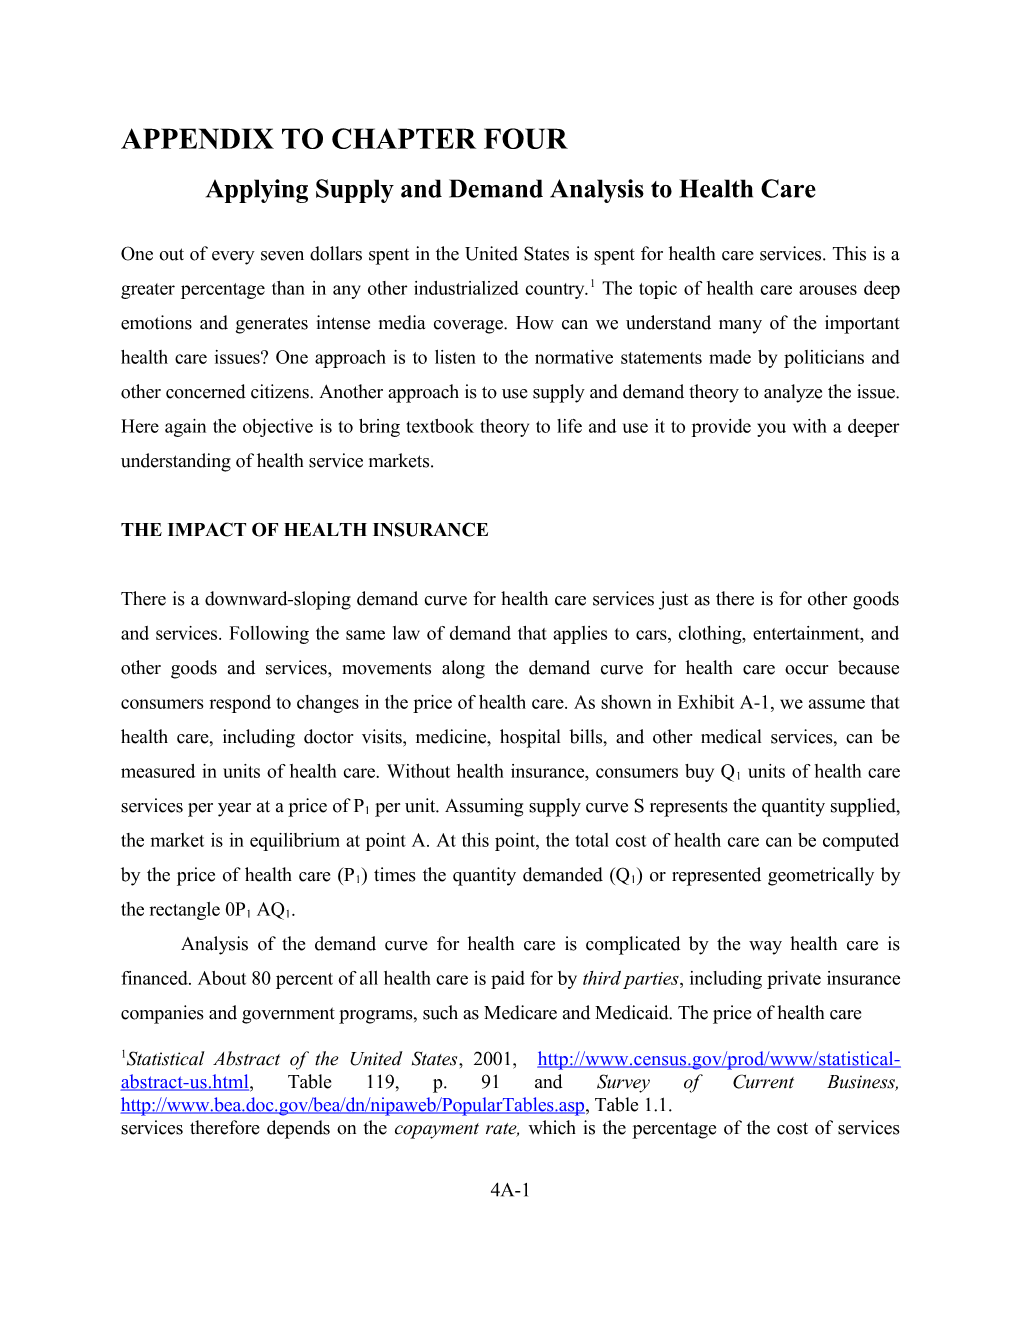 Appendix to Chapter 4: Applying Supply and Demand Analysis to Health Care